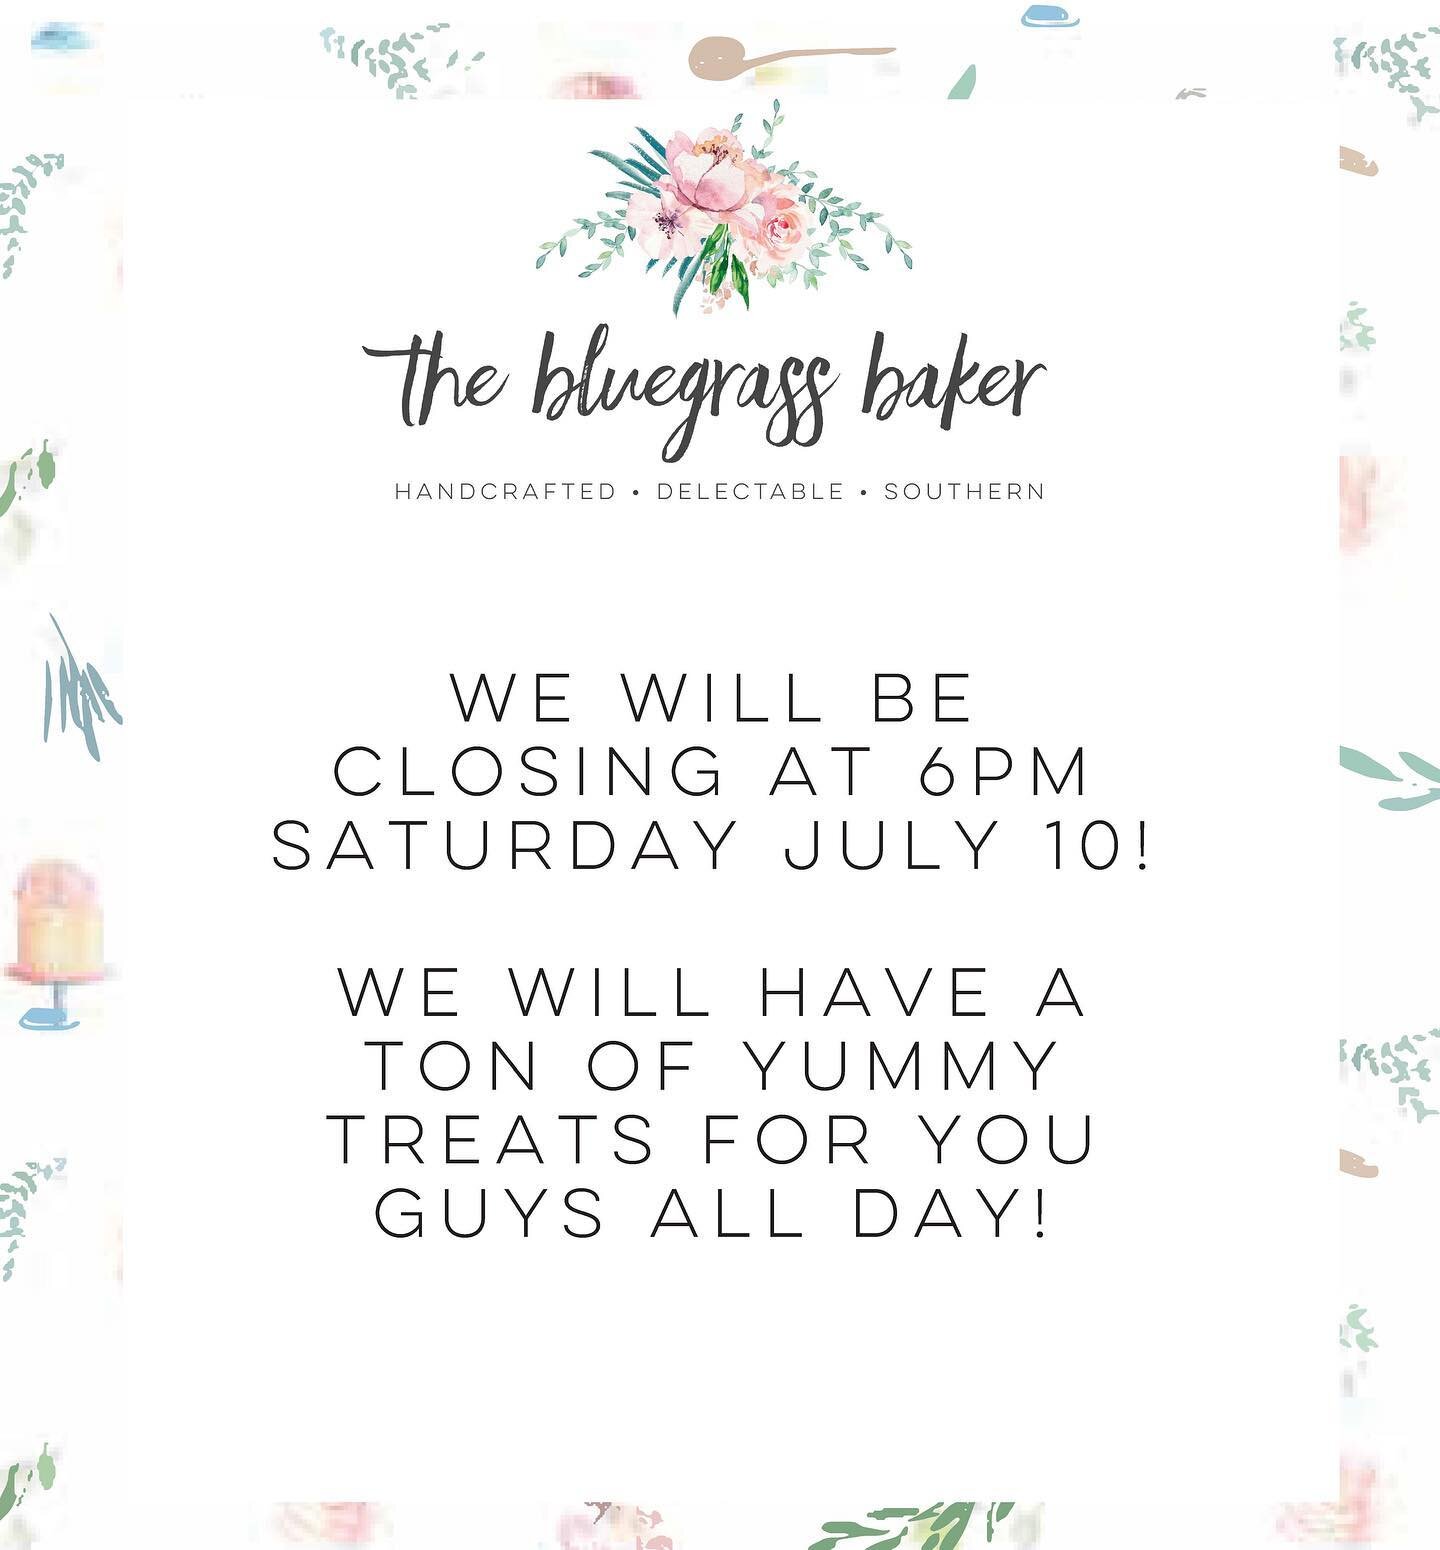 We will be closing at 6pm today, instead of 8! Come grab all your goodies before 6! We will have cheesecakes, case cakes, take home cake trays and more! 💙💙